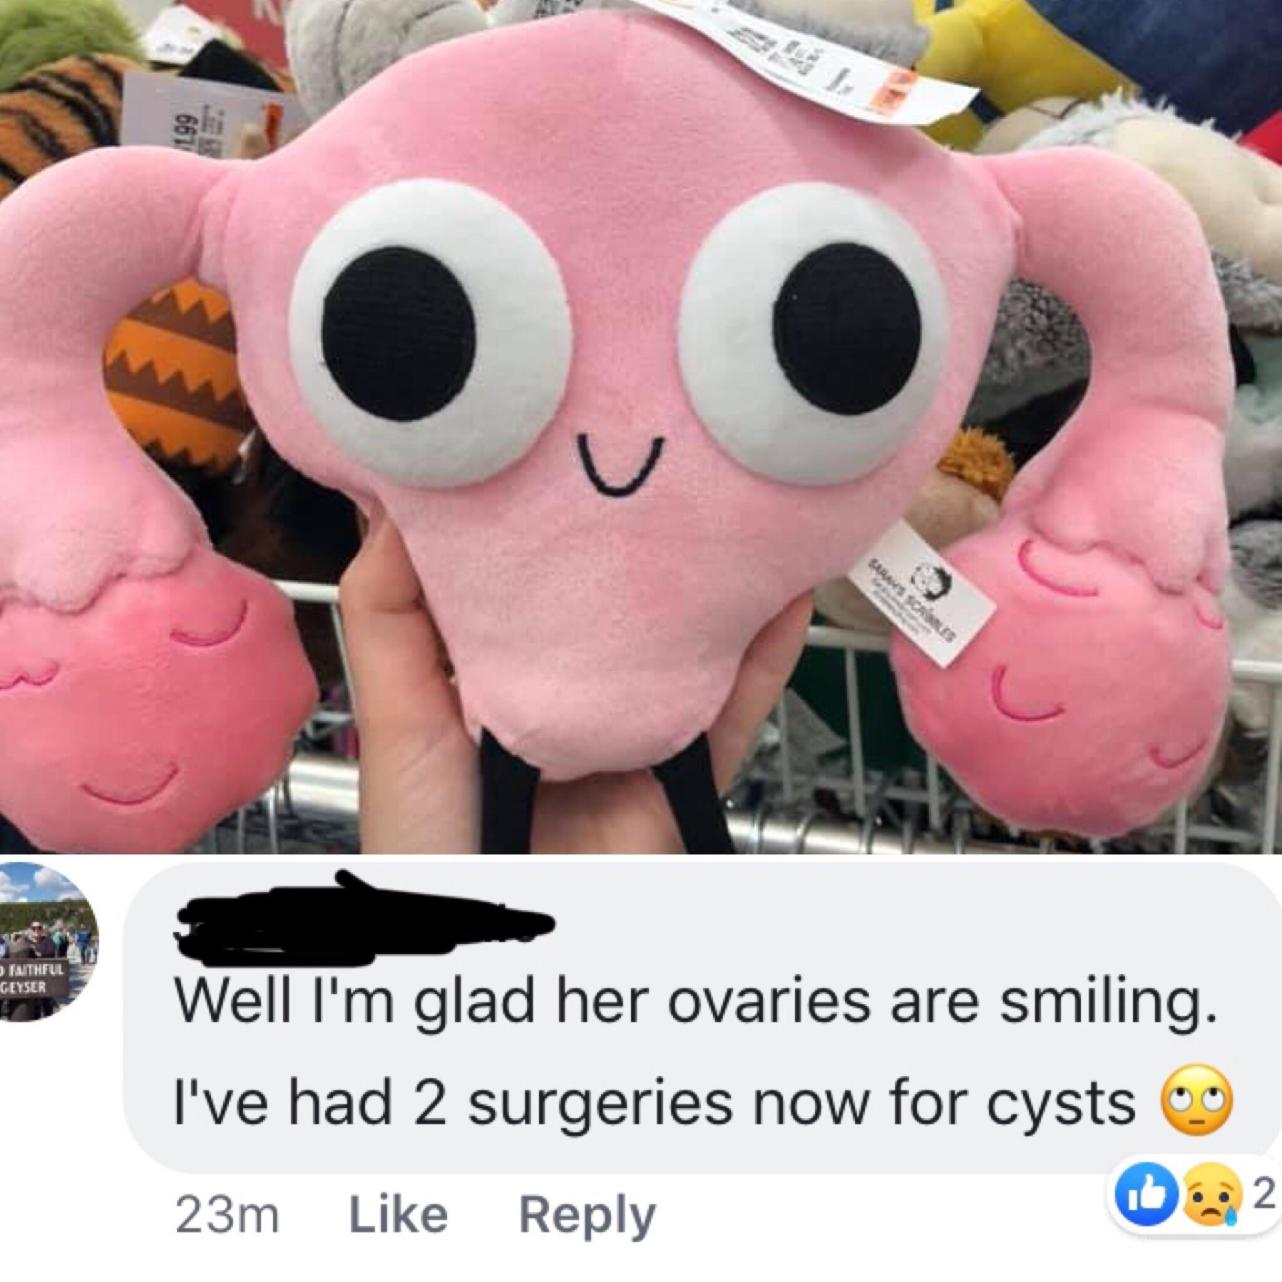 stuffed toy - Faithful Geyser Well I'm glad her ovaries are smiling. I've had 2 surgeries now for cysts 09 23m D2